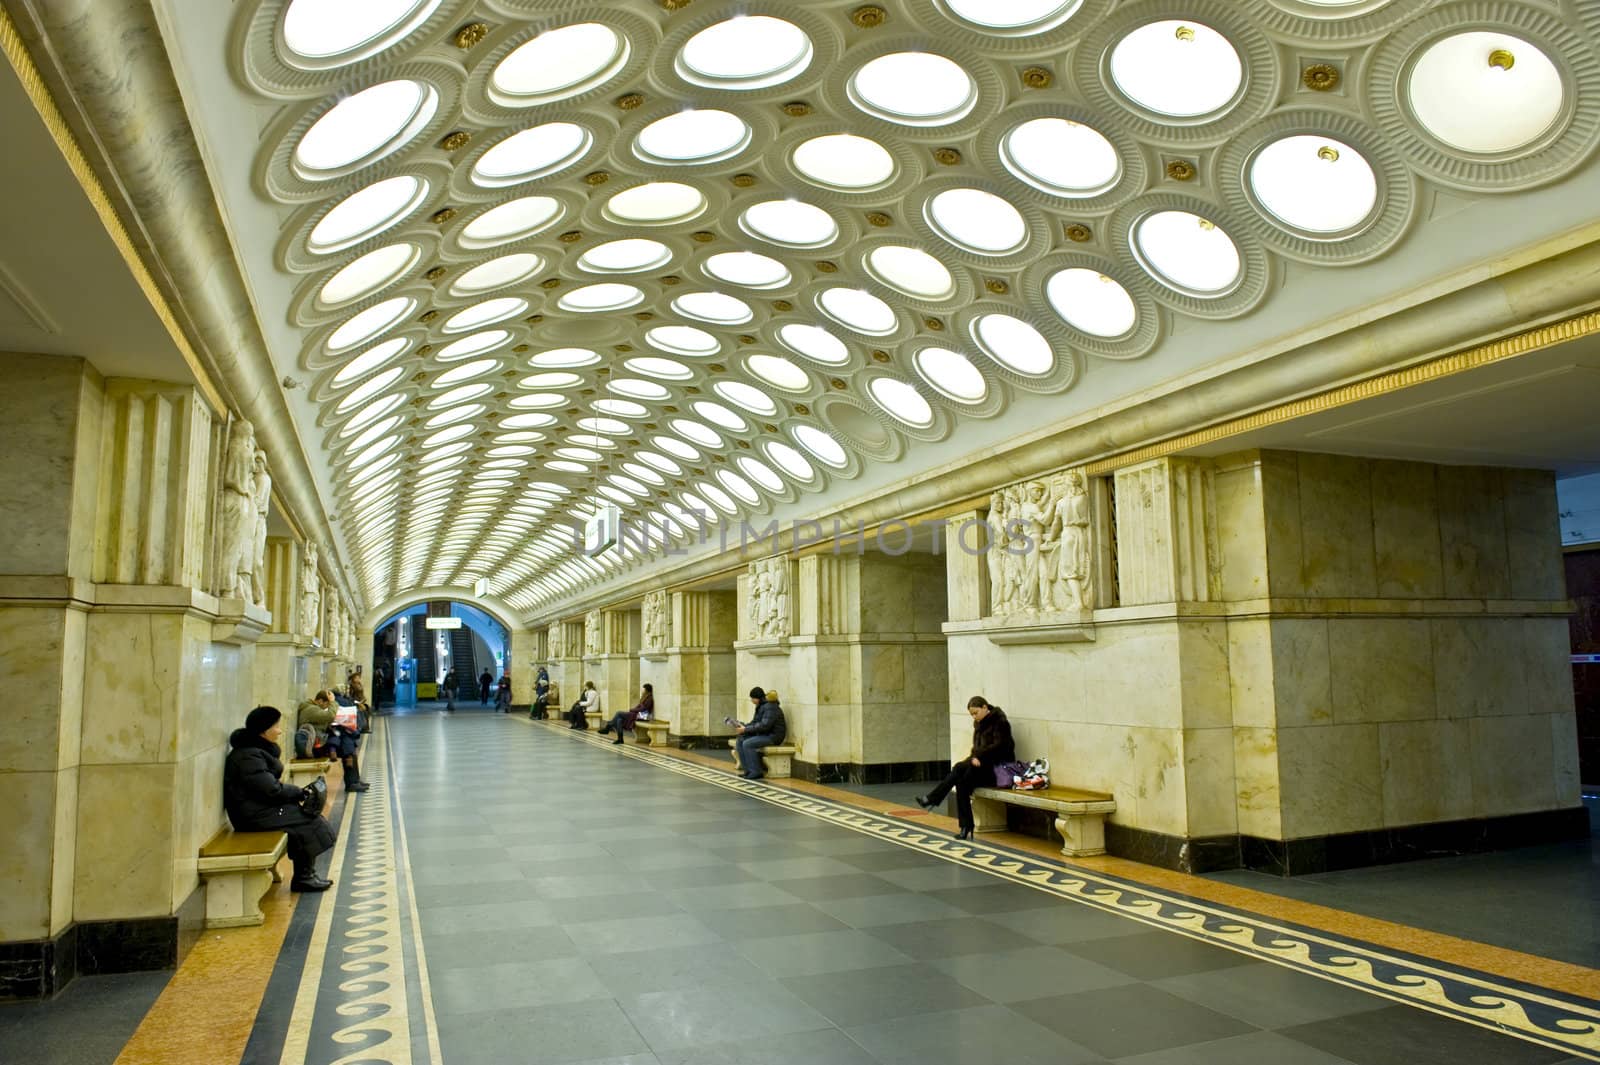 The interior of metro station in Moscow, Russia